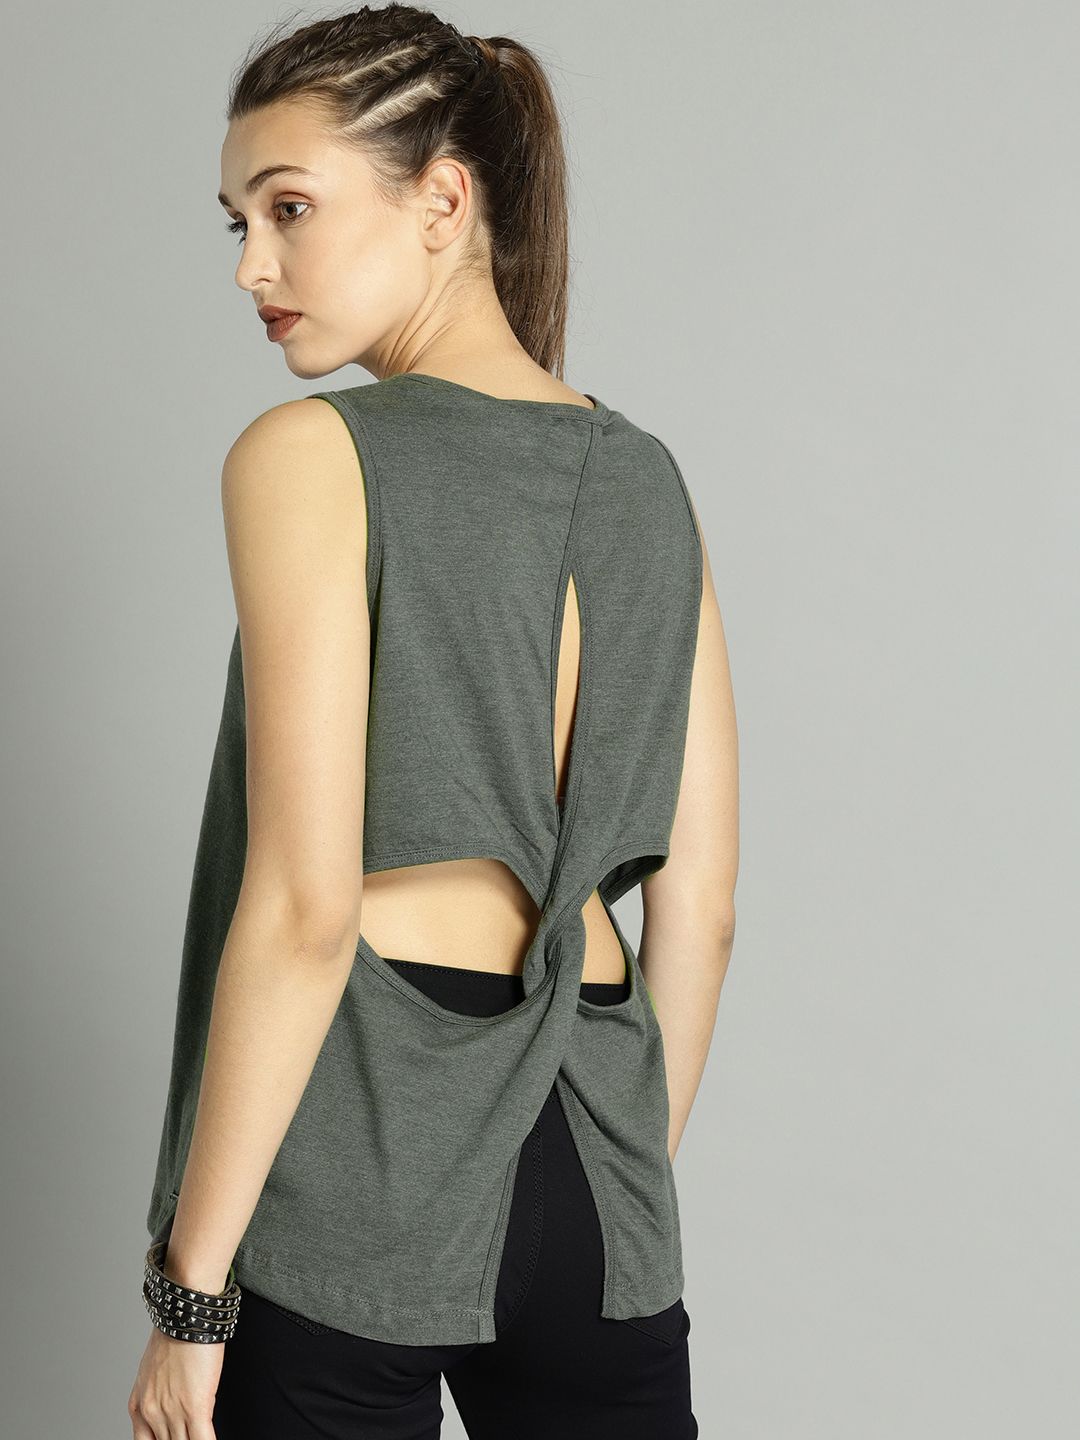 Roadster Women Grey Solid Styled Back Top